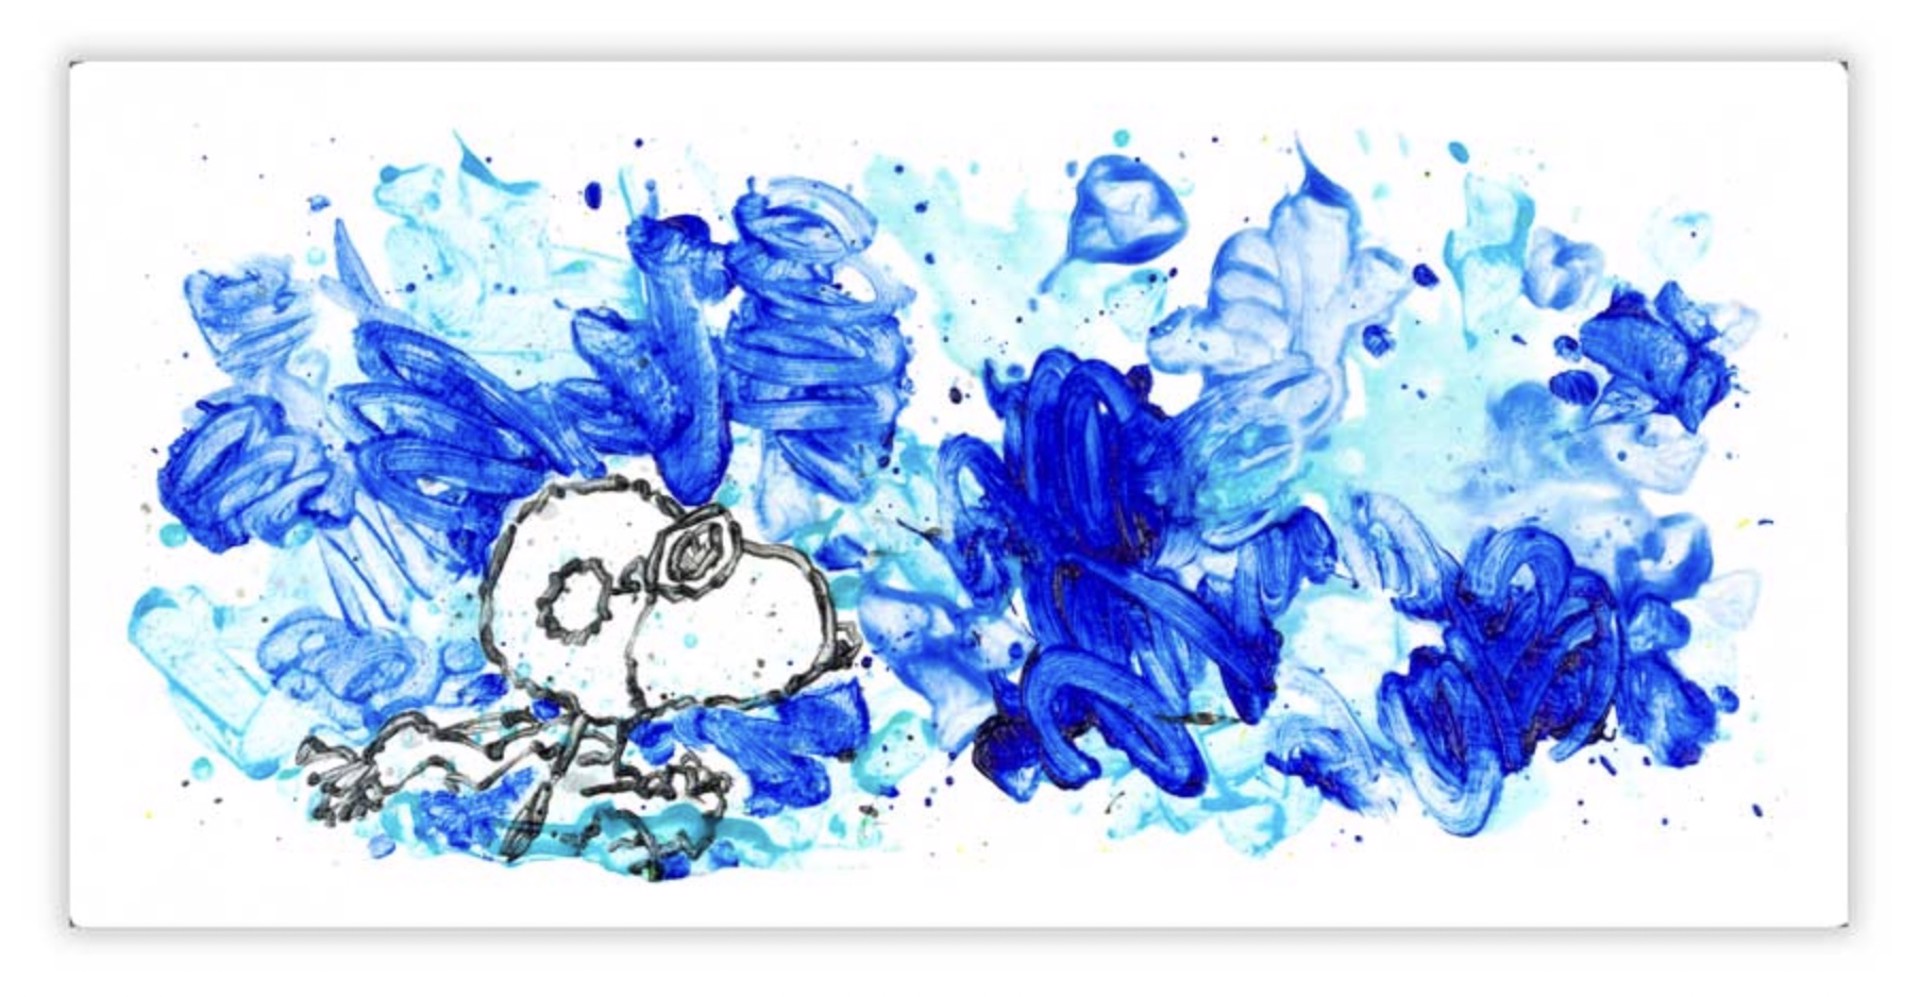 Partly Cloudy 7:15 Morning Fly by Tom Everhart